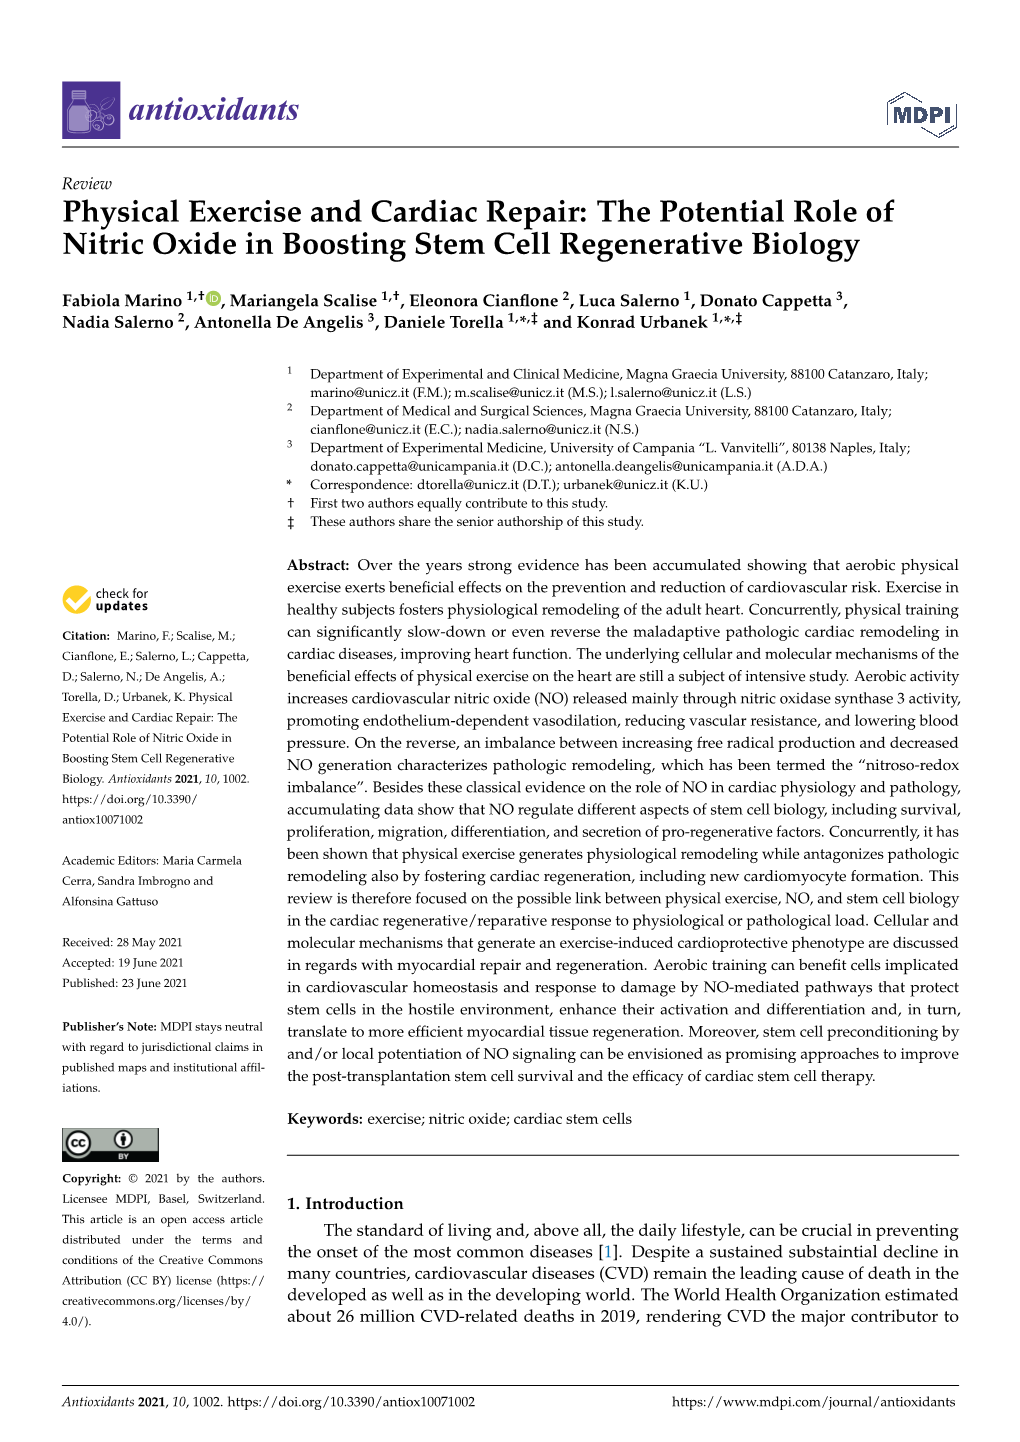 The Potential Role of Nitric Oxide in Boosting Stem Cell Regenerative Biology